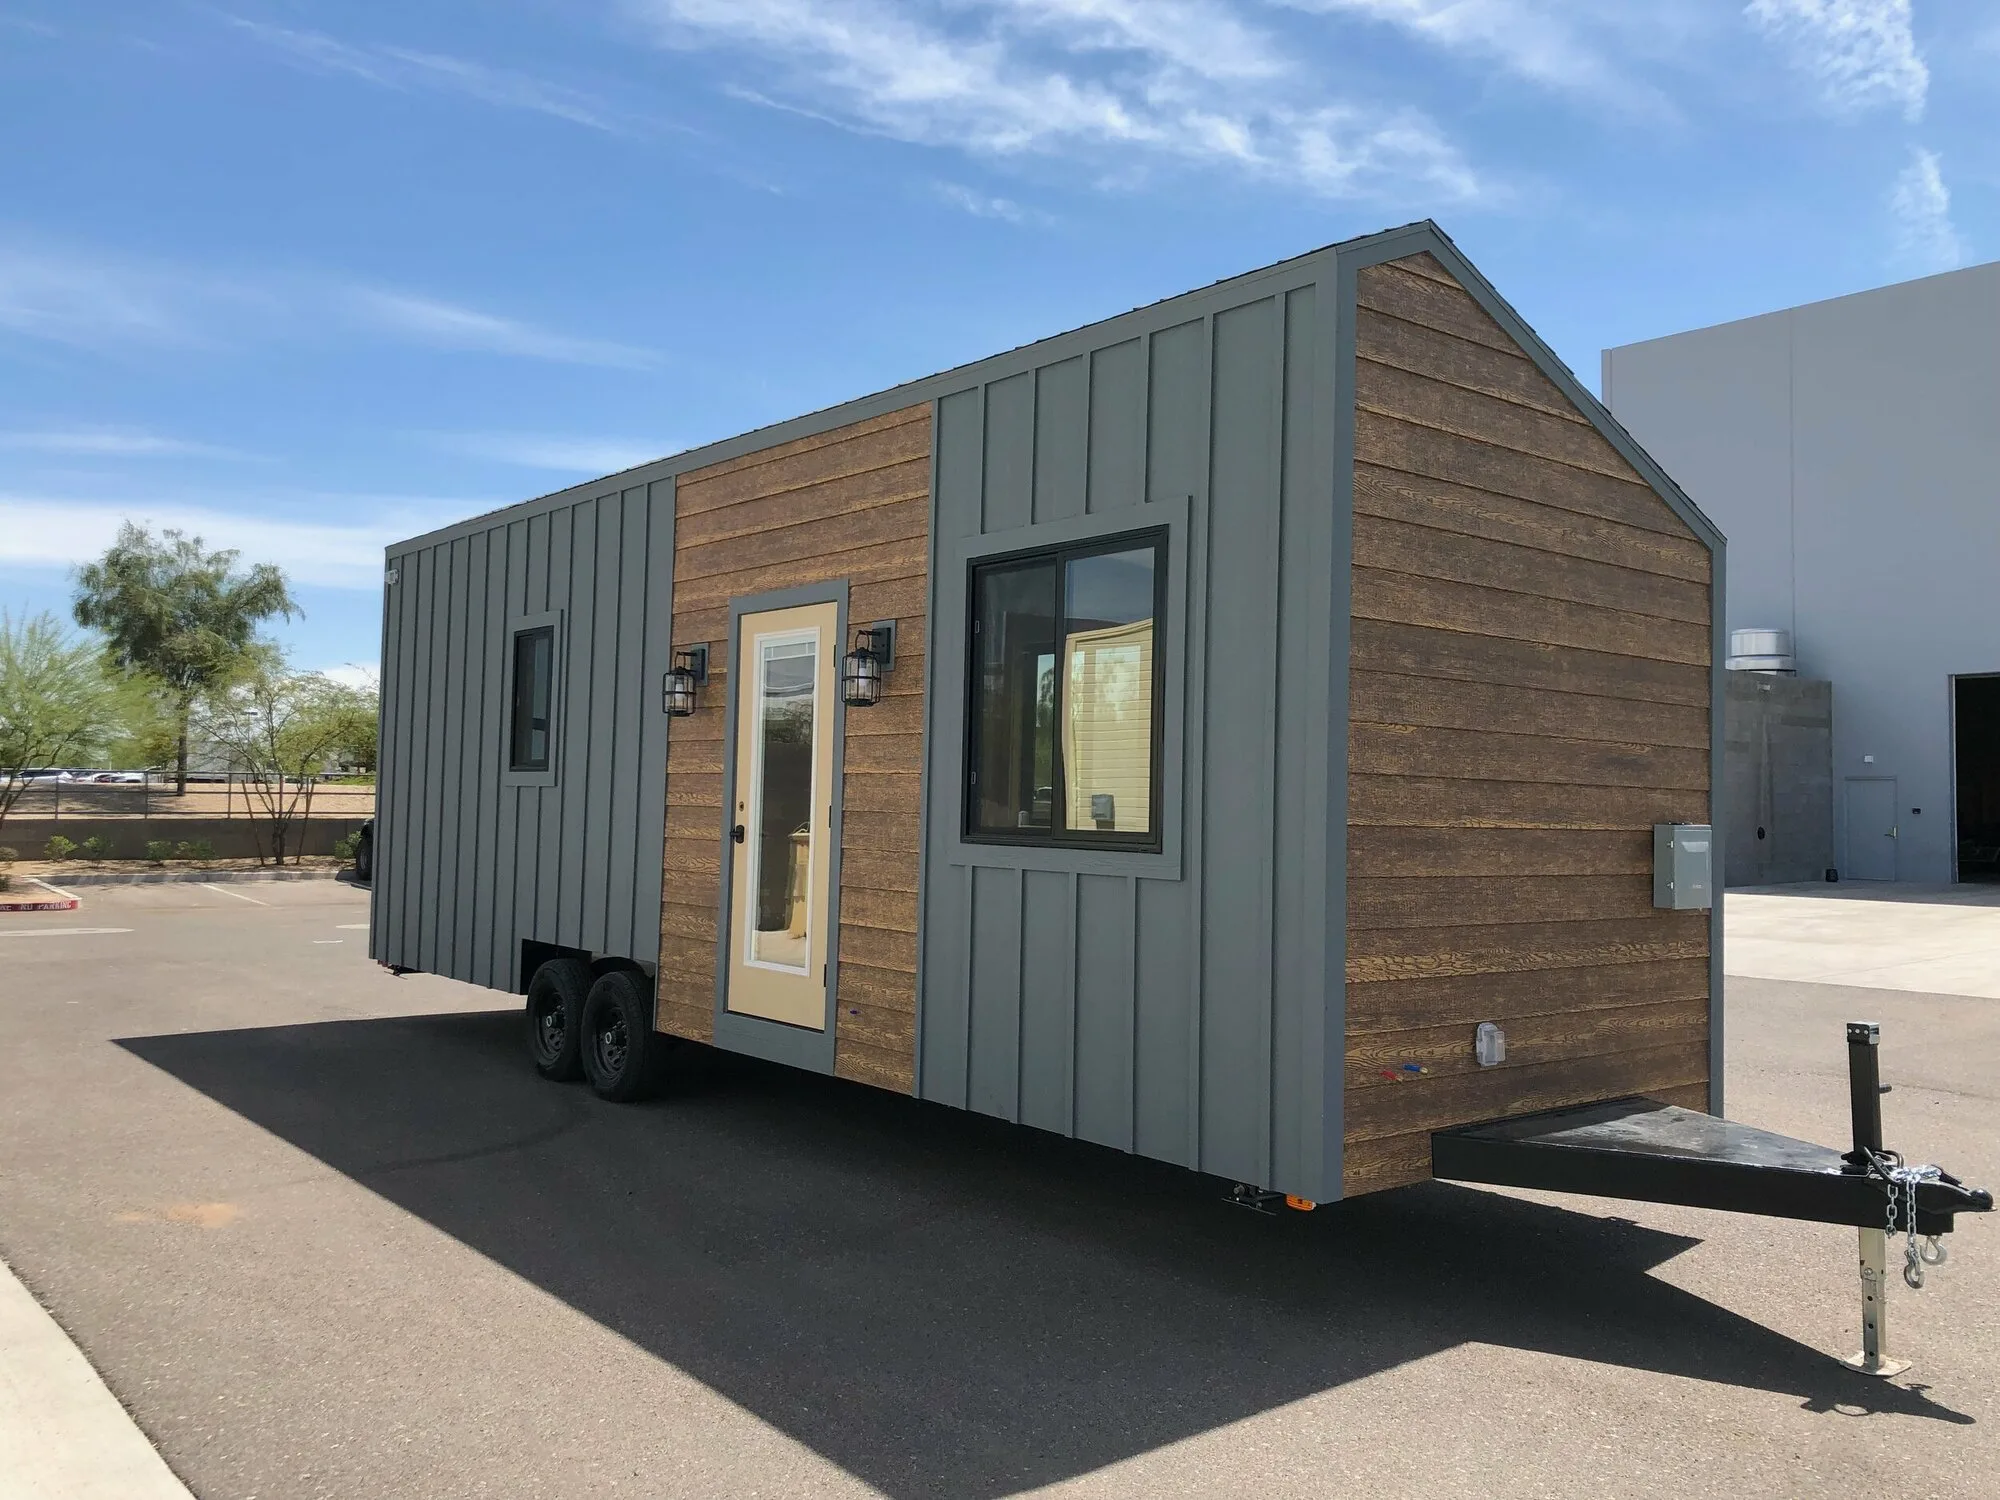 Exterior View - Flat by Uncharted Tiny Homes